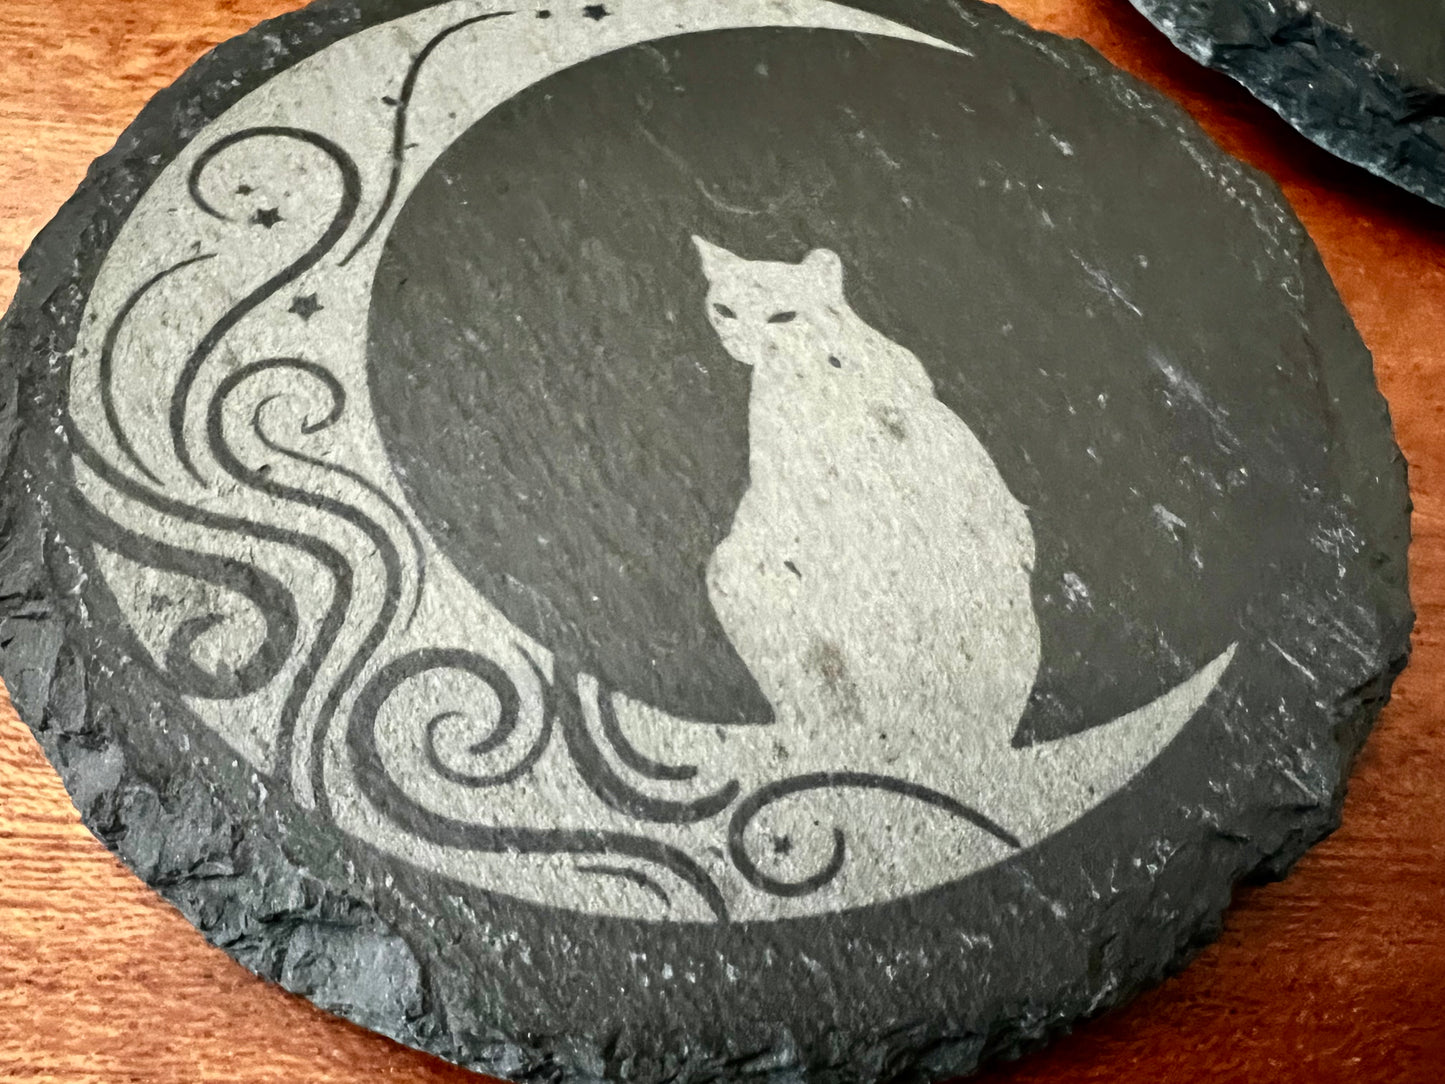 Coasters - Slate Cats & Moons Engraved Set of Four with rubber backing